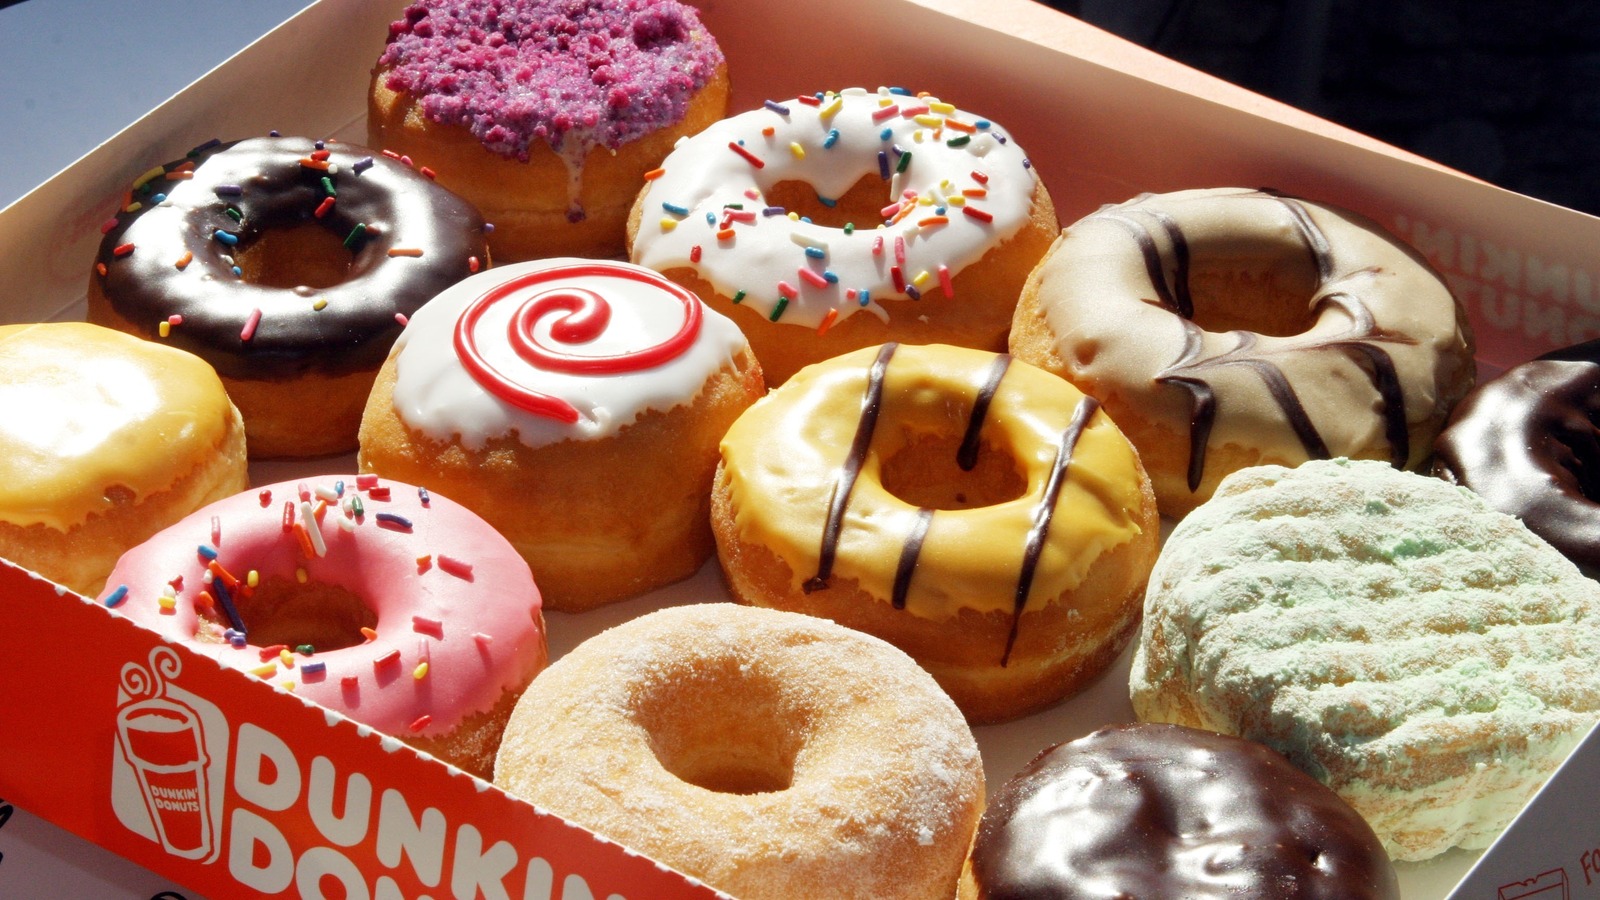 21 things you didn’t know about Dunkin’